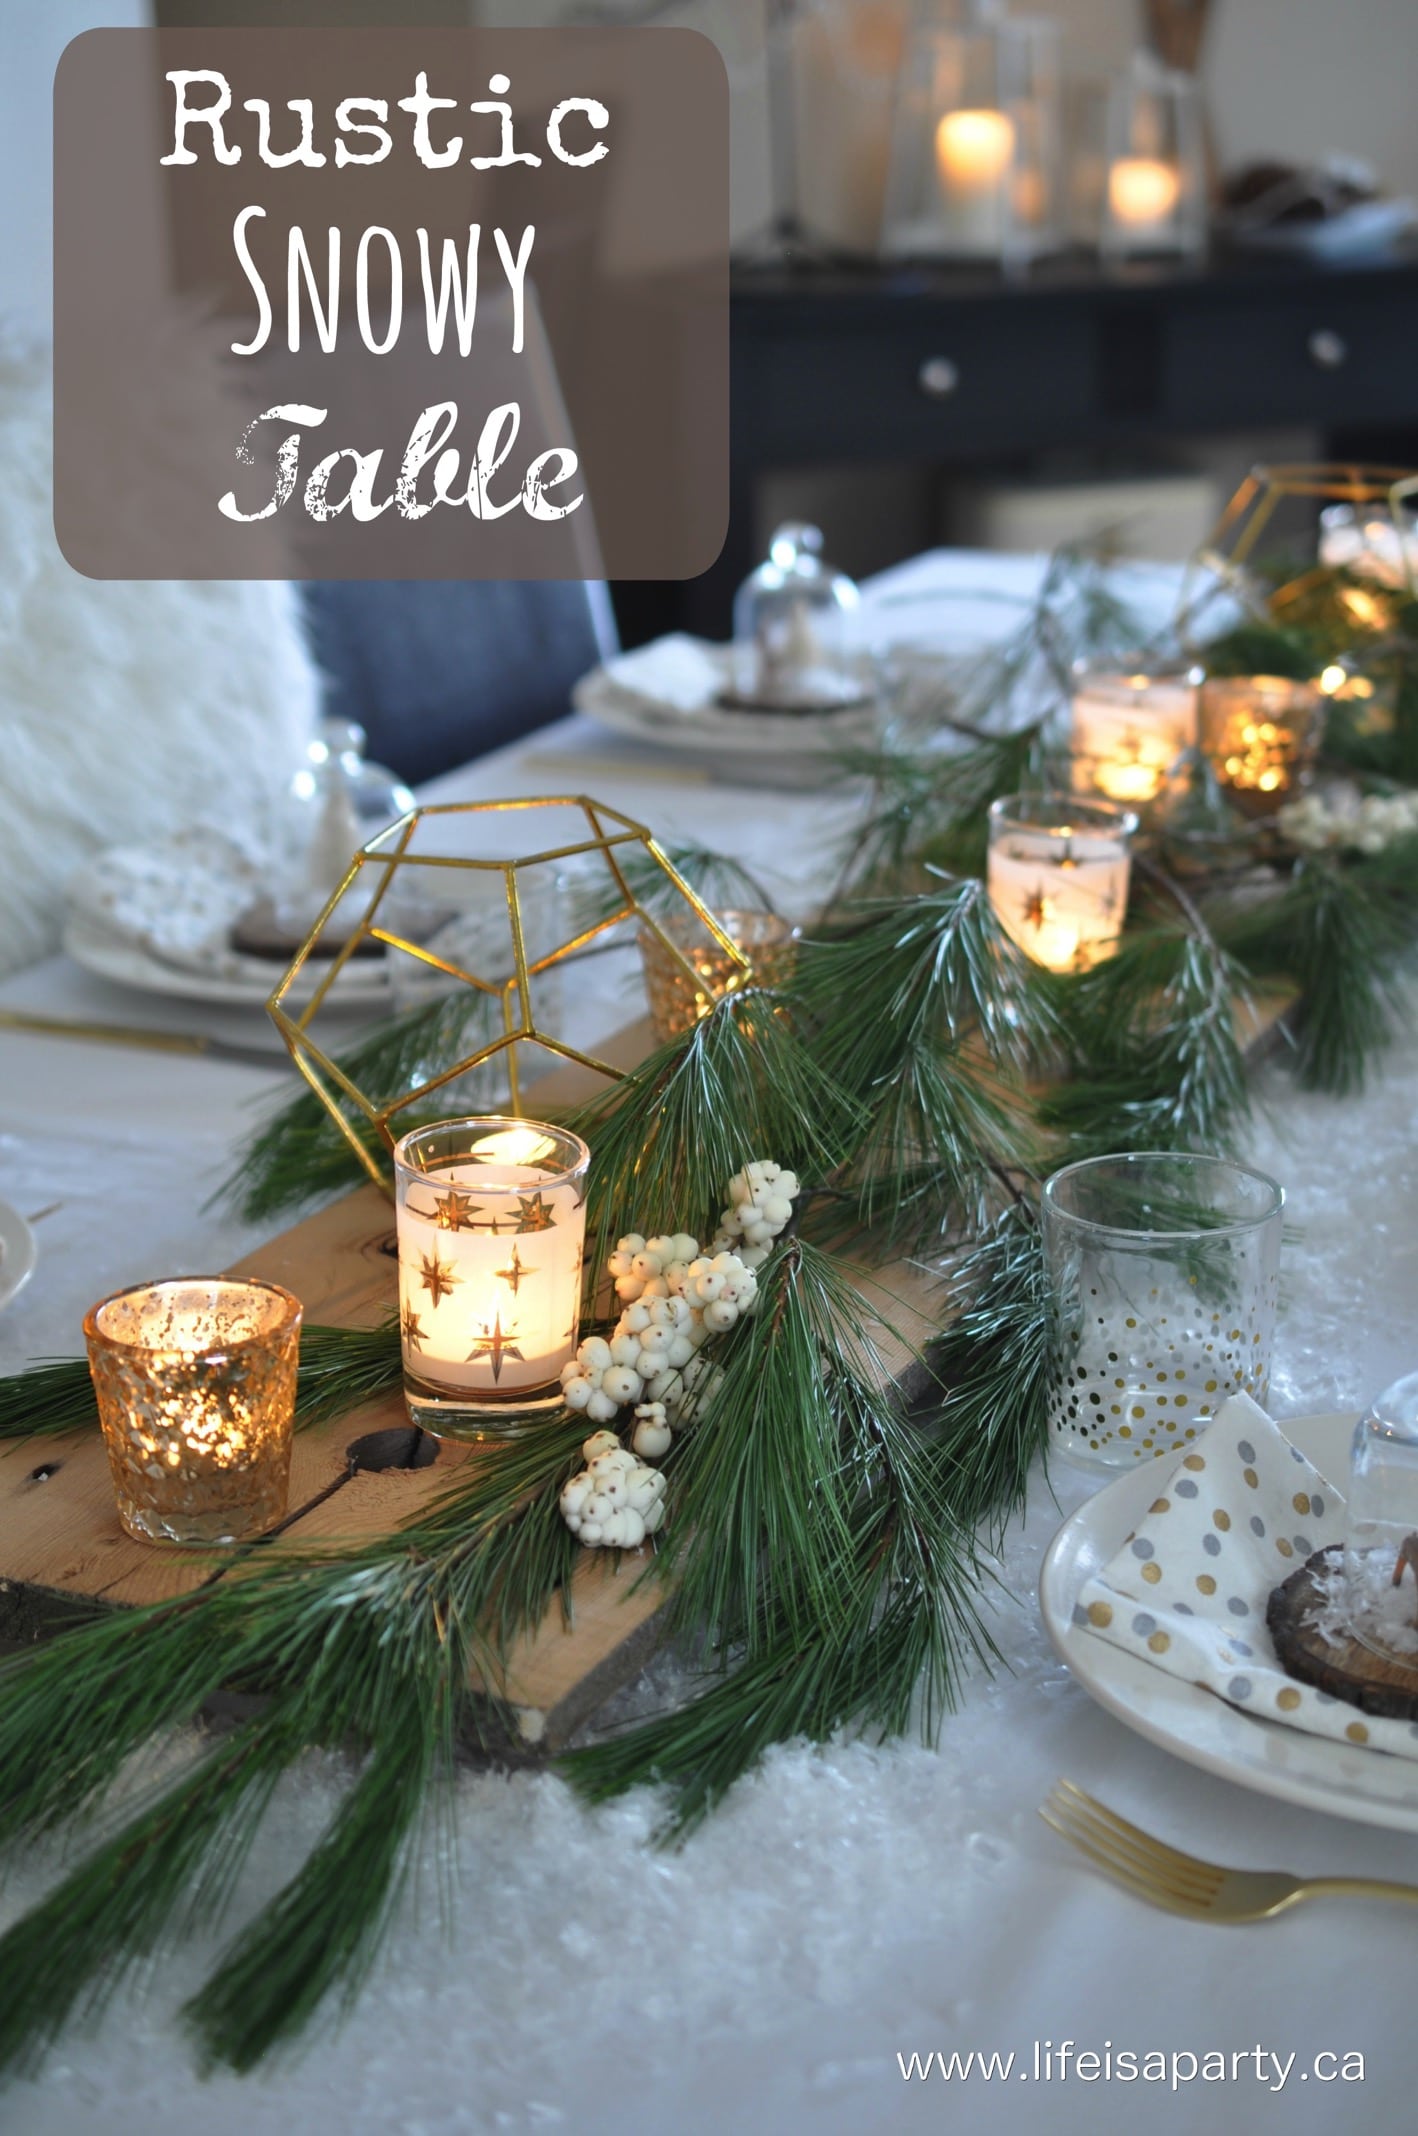 Rustic Snowy Chrismtas Tablescape: with faux snow, fresh greens, and winter berries and personalized DIY snow globe place cards.